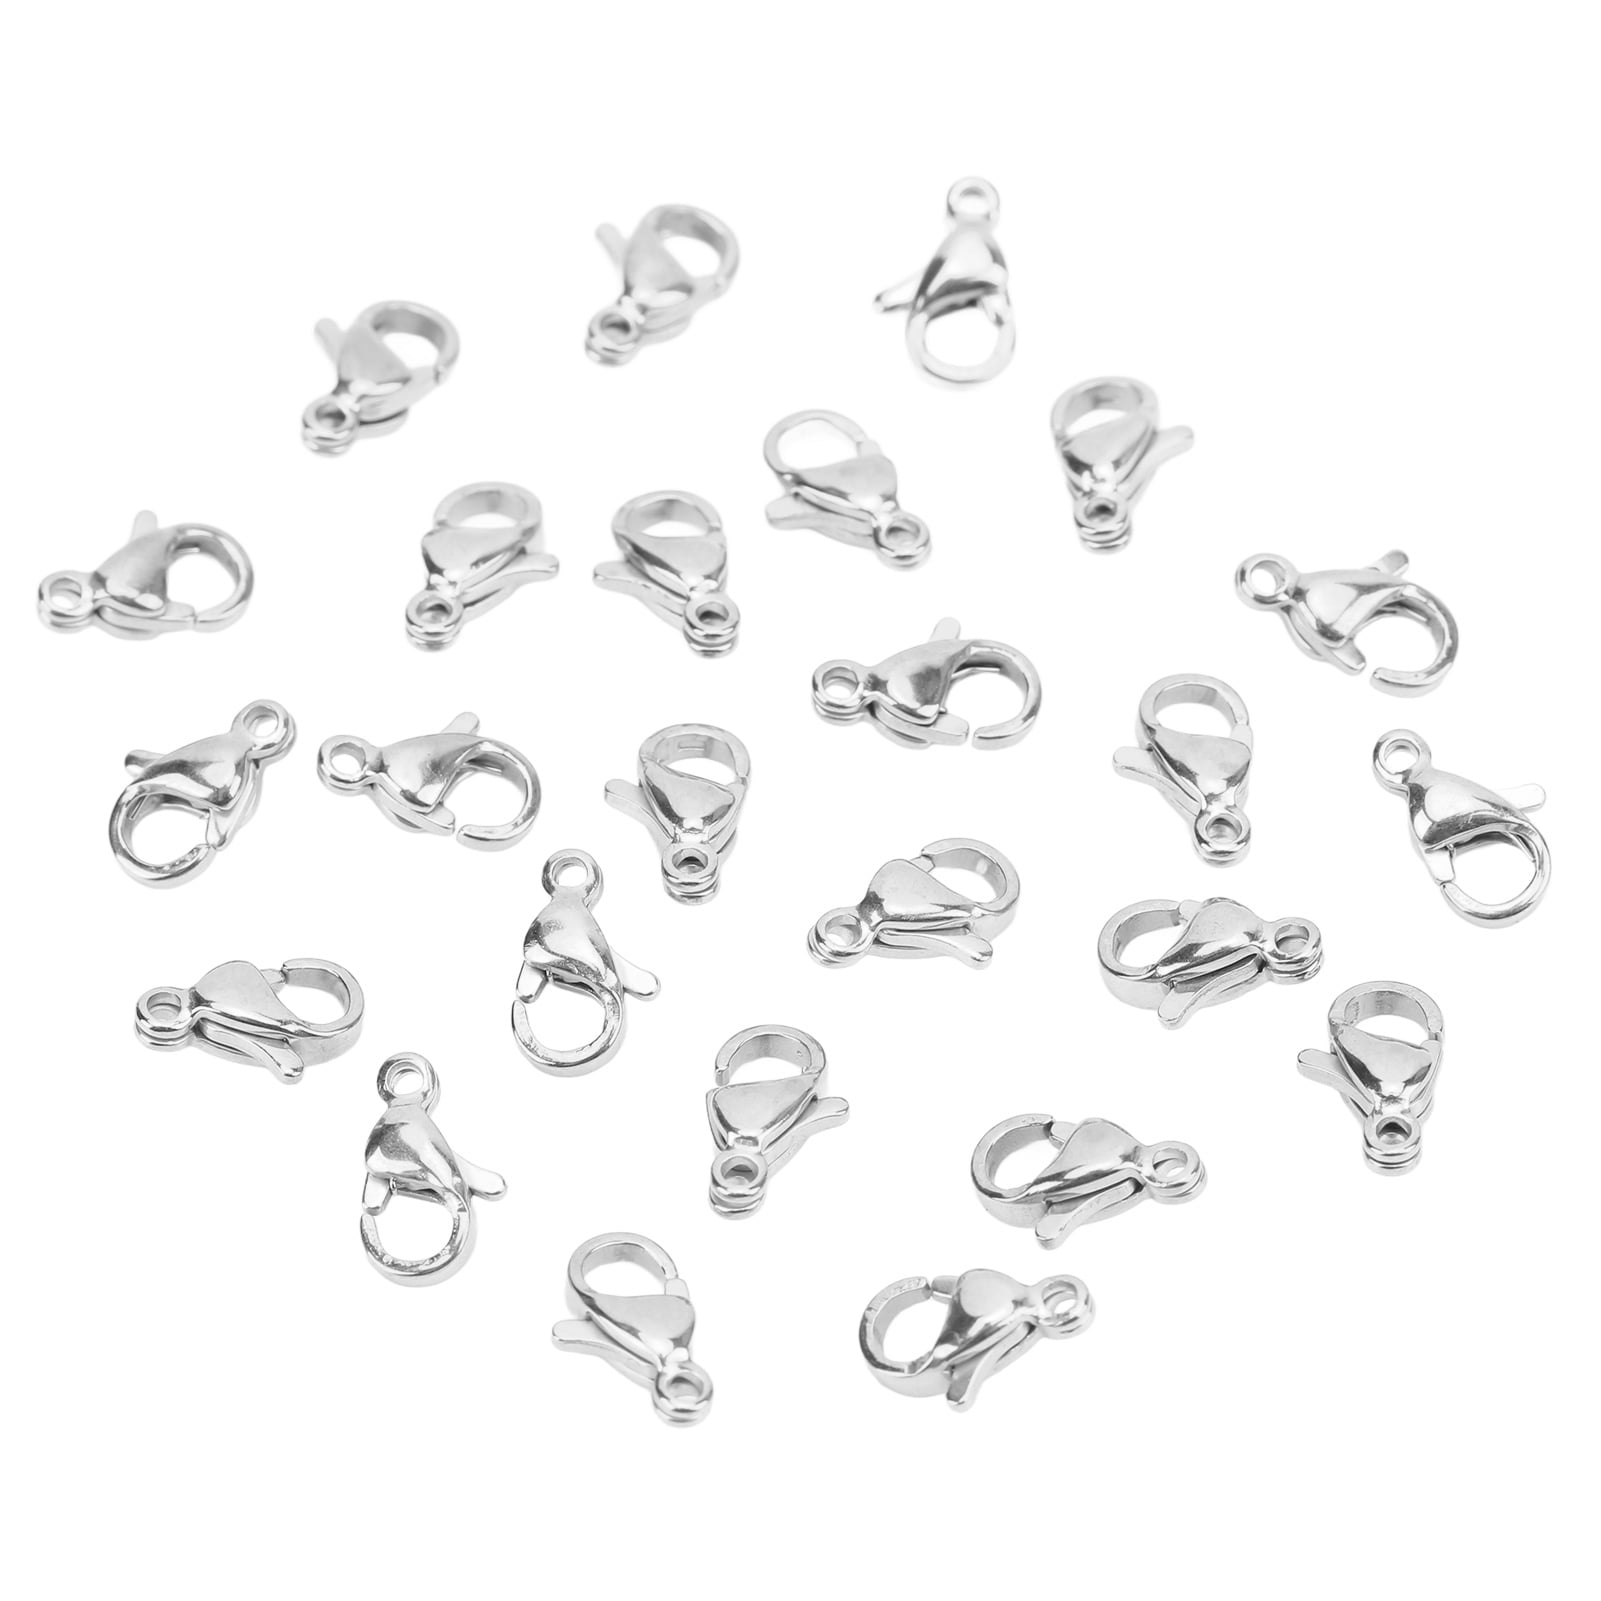 Mandala Crafts SS Lobster Claw Clasps for Jewelry Making - 100 Stainless  Steel Lobster Clasp Kit - 15mm Lobster Clasps Jewelry Clasps for Necklace